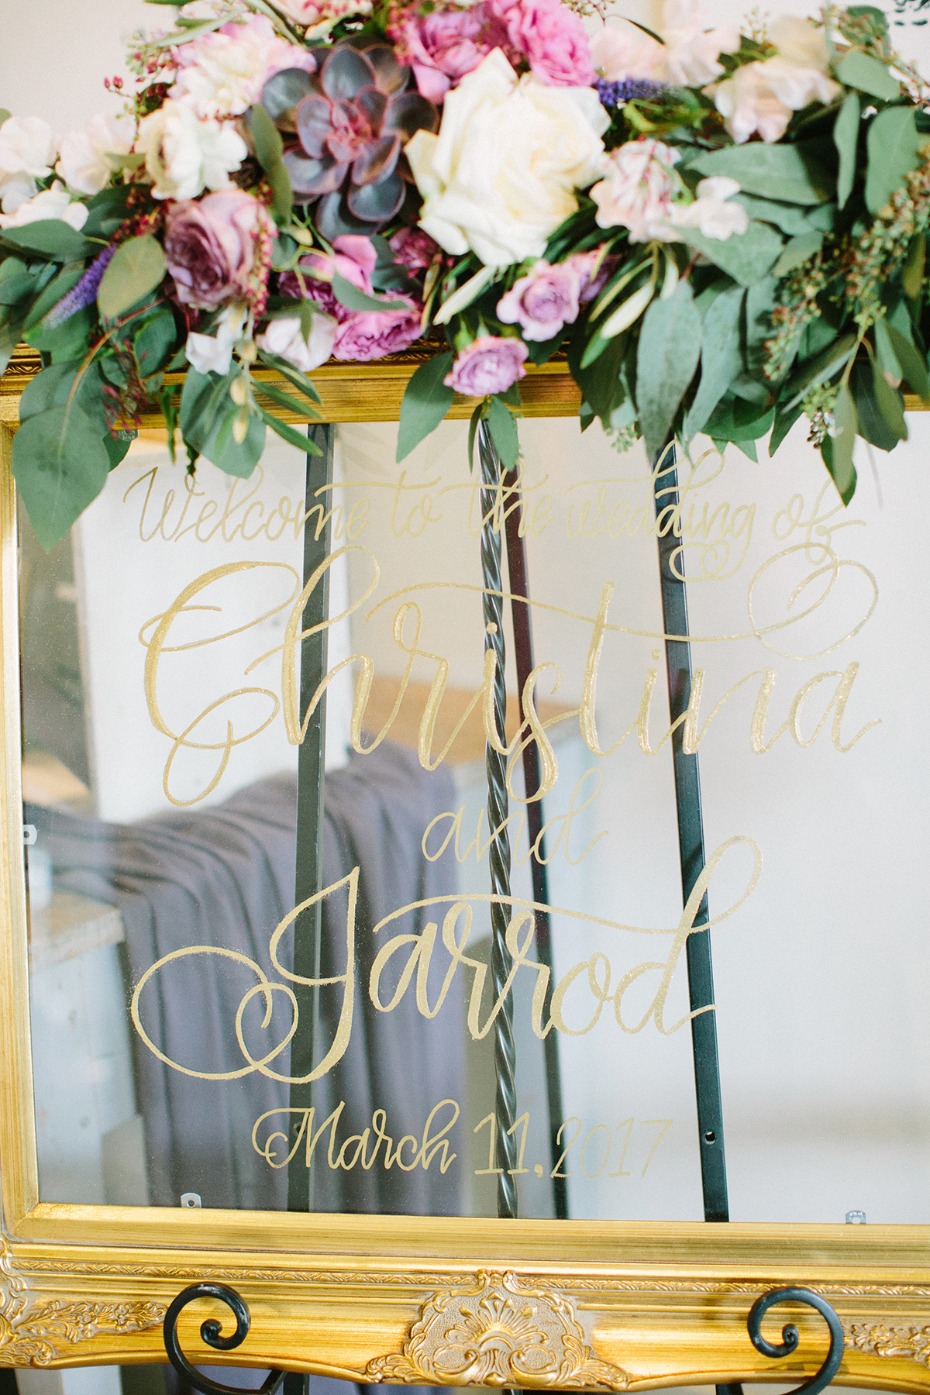 Window welcome sign idea with gold calligraphy